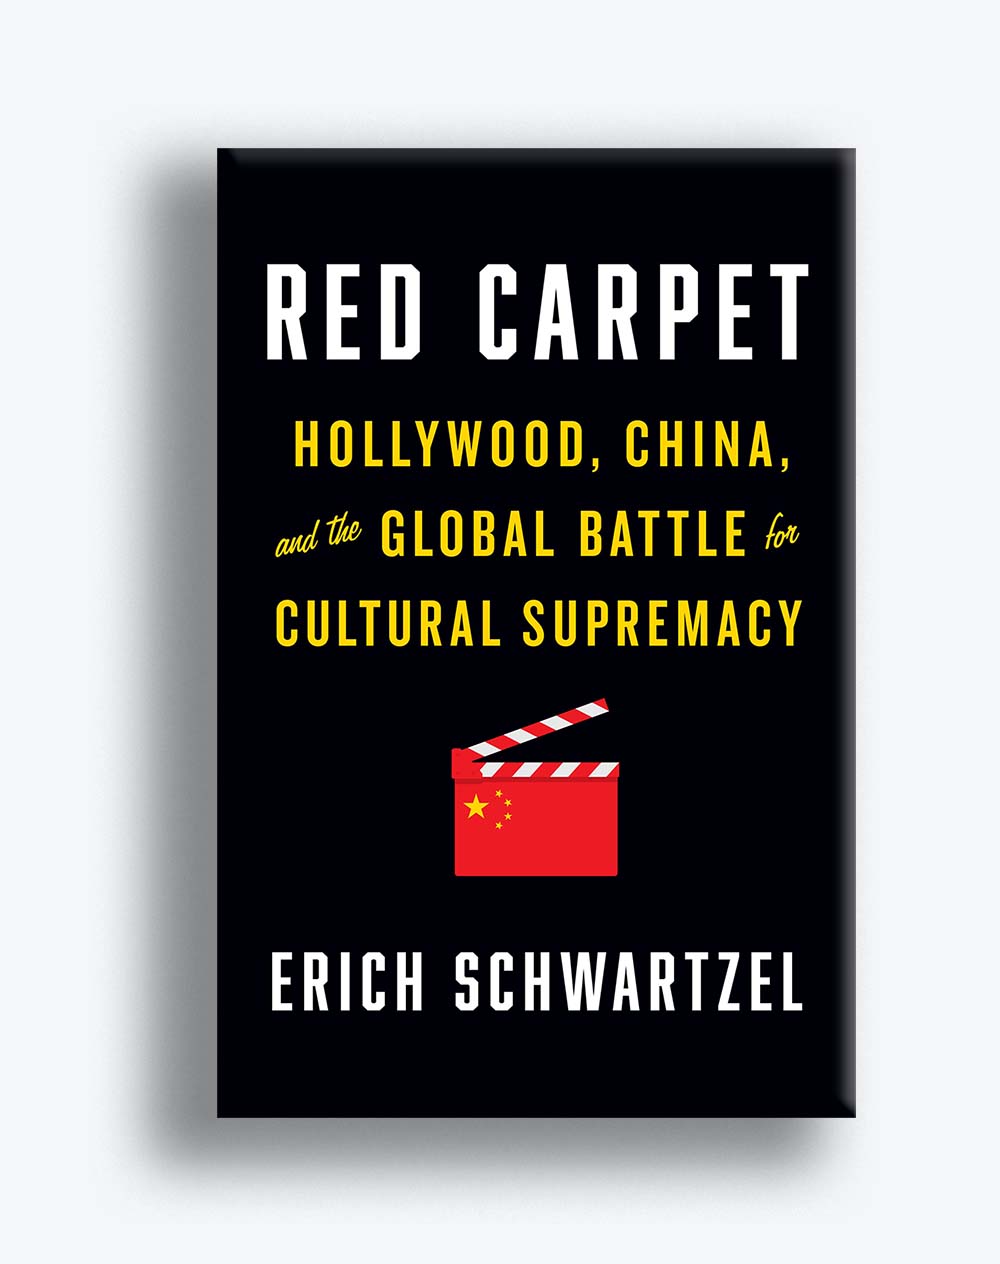 Book cover for Erich Schwartzel's Red Carpet: Hollywood, China, and the Global Battle for Cultural Supremacy. The cover is black with white and yellow text, and features a red clapper board icon at the center. 